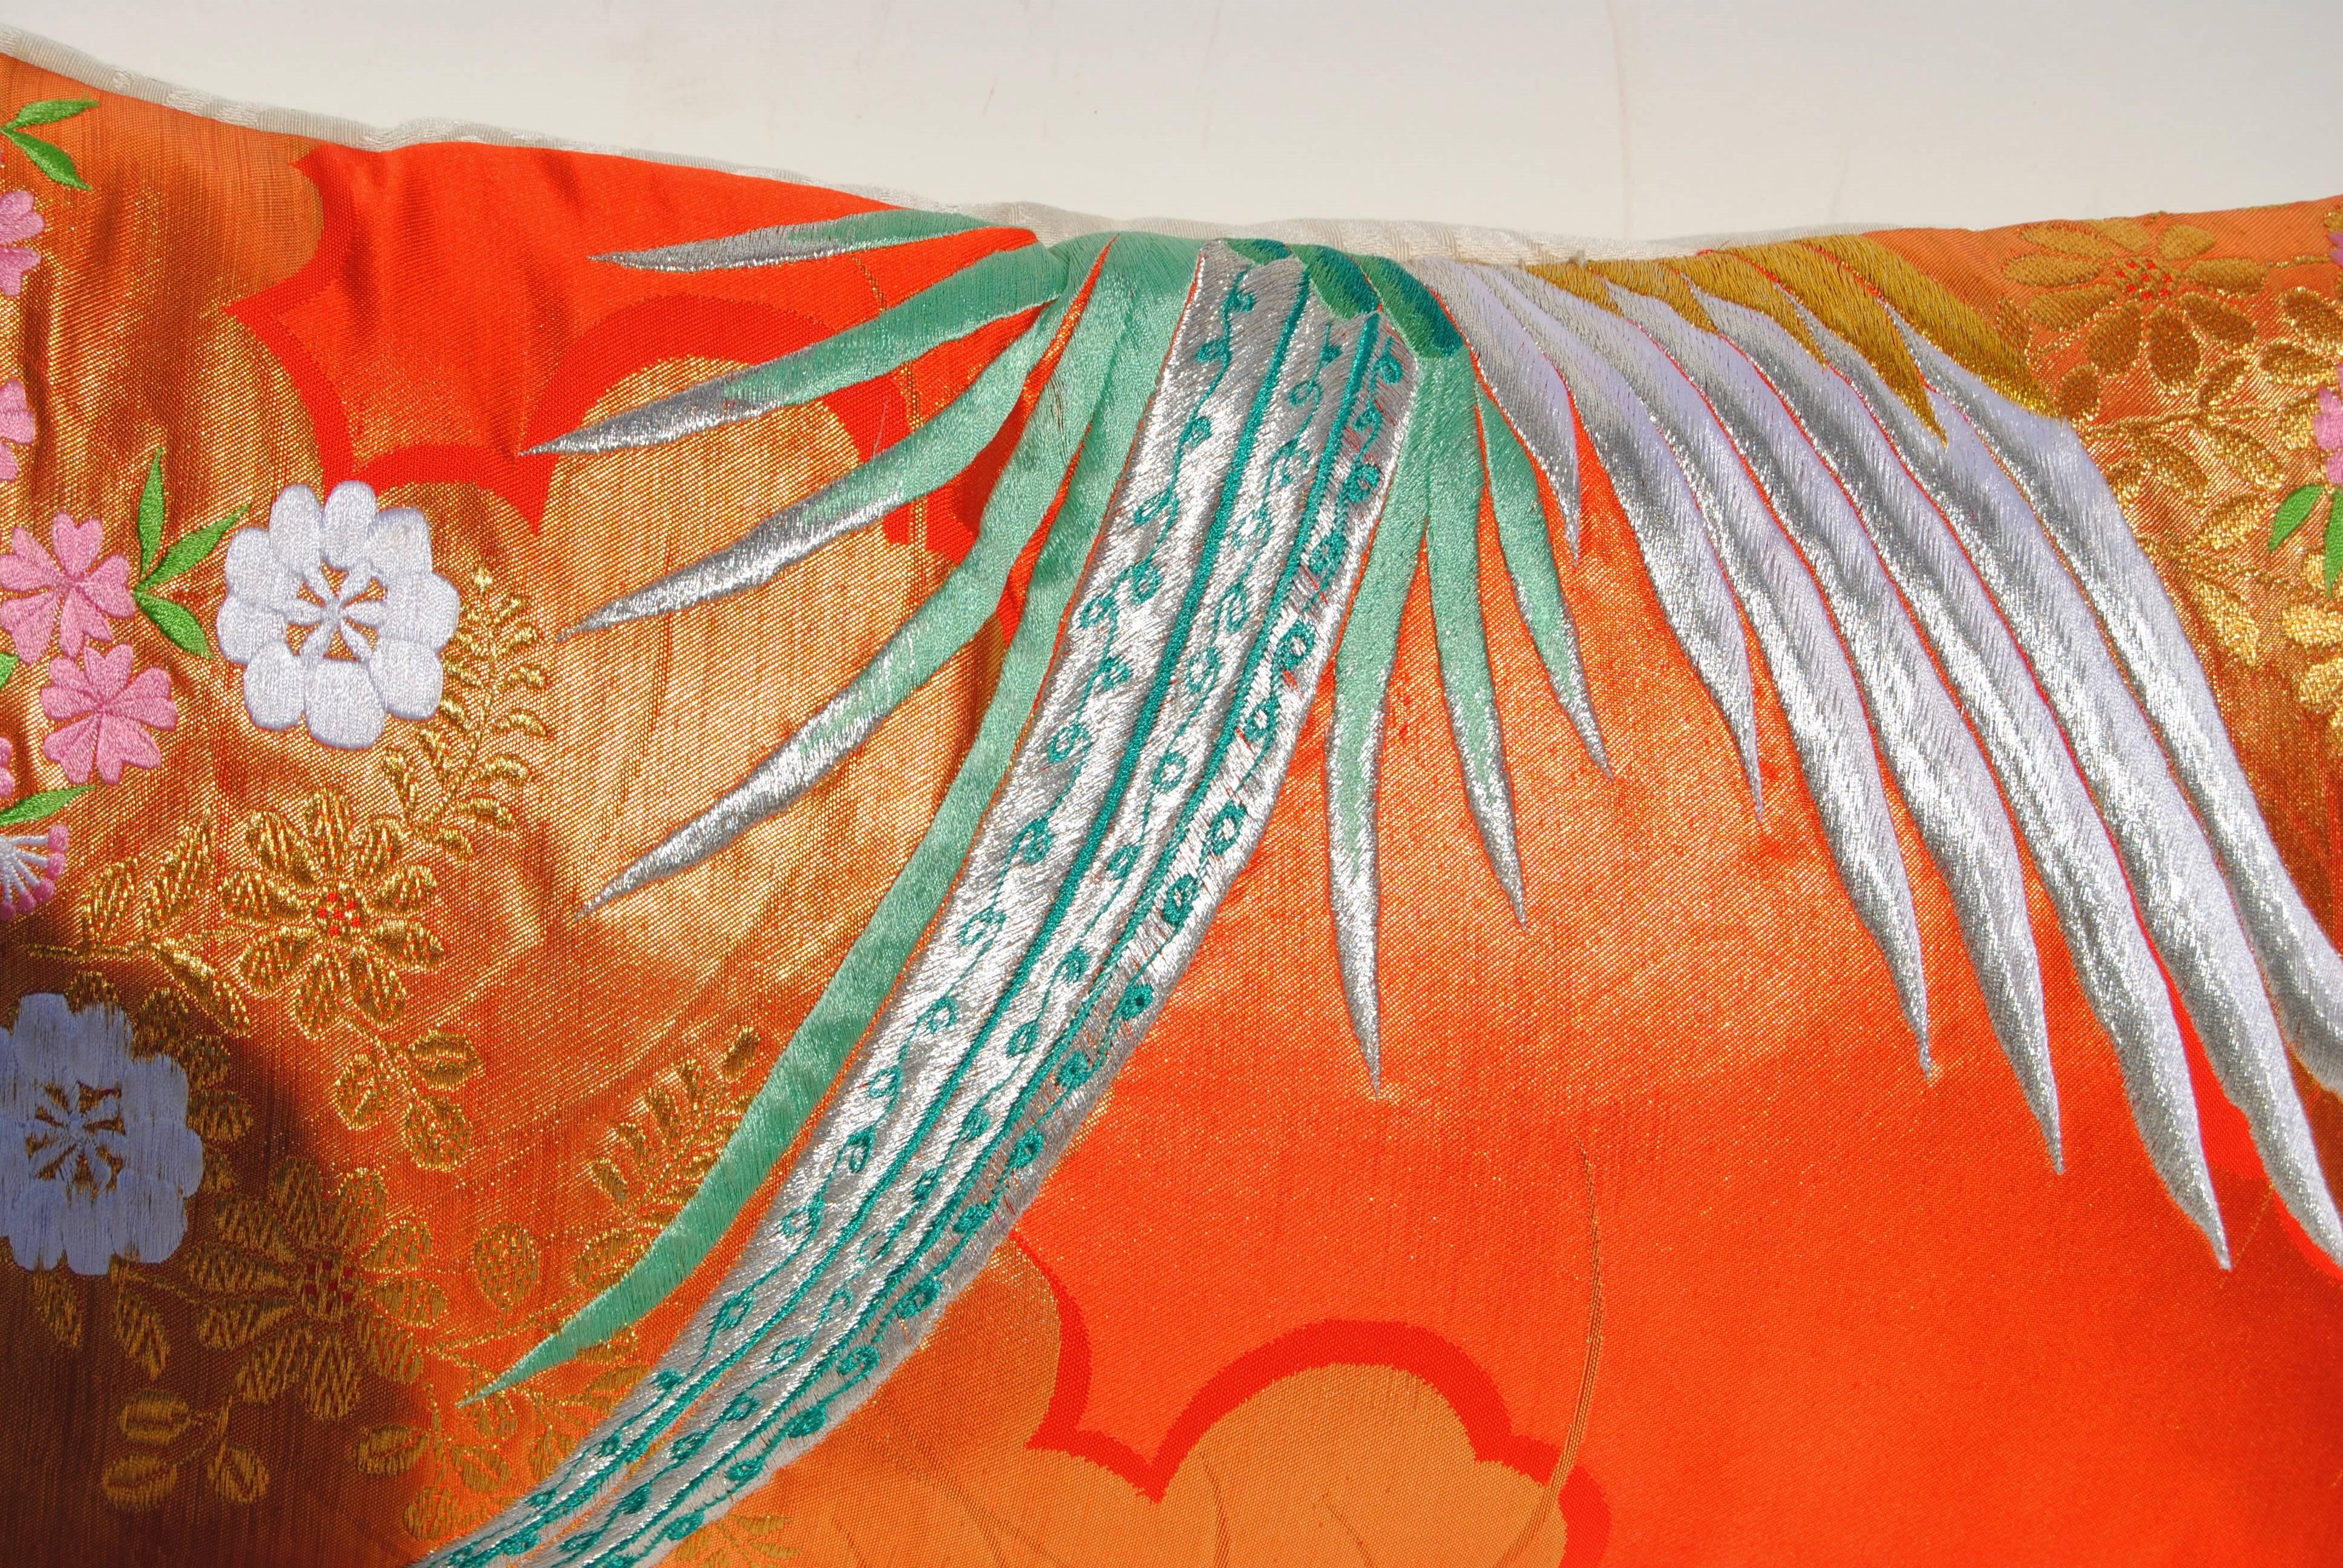 Custom pillow cut from a vintage Japanese silk uchikake, the traditional wedding kimono. The silk is embroidered with metallic and silk threads in vibrant colors. Pillow is backed in a Scalamandre silk damask, filled with an insert of 50/50 down and